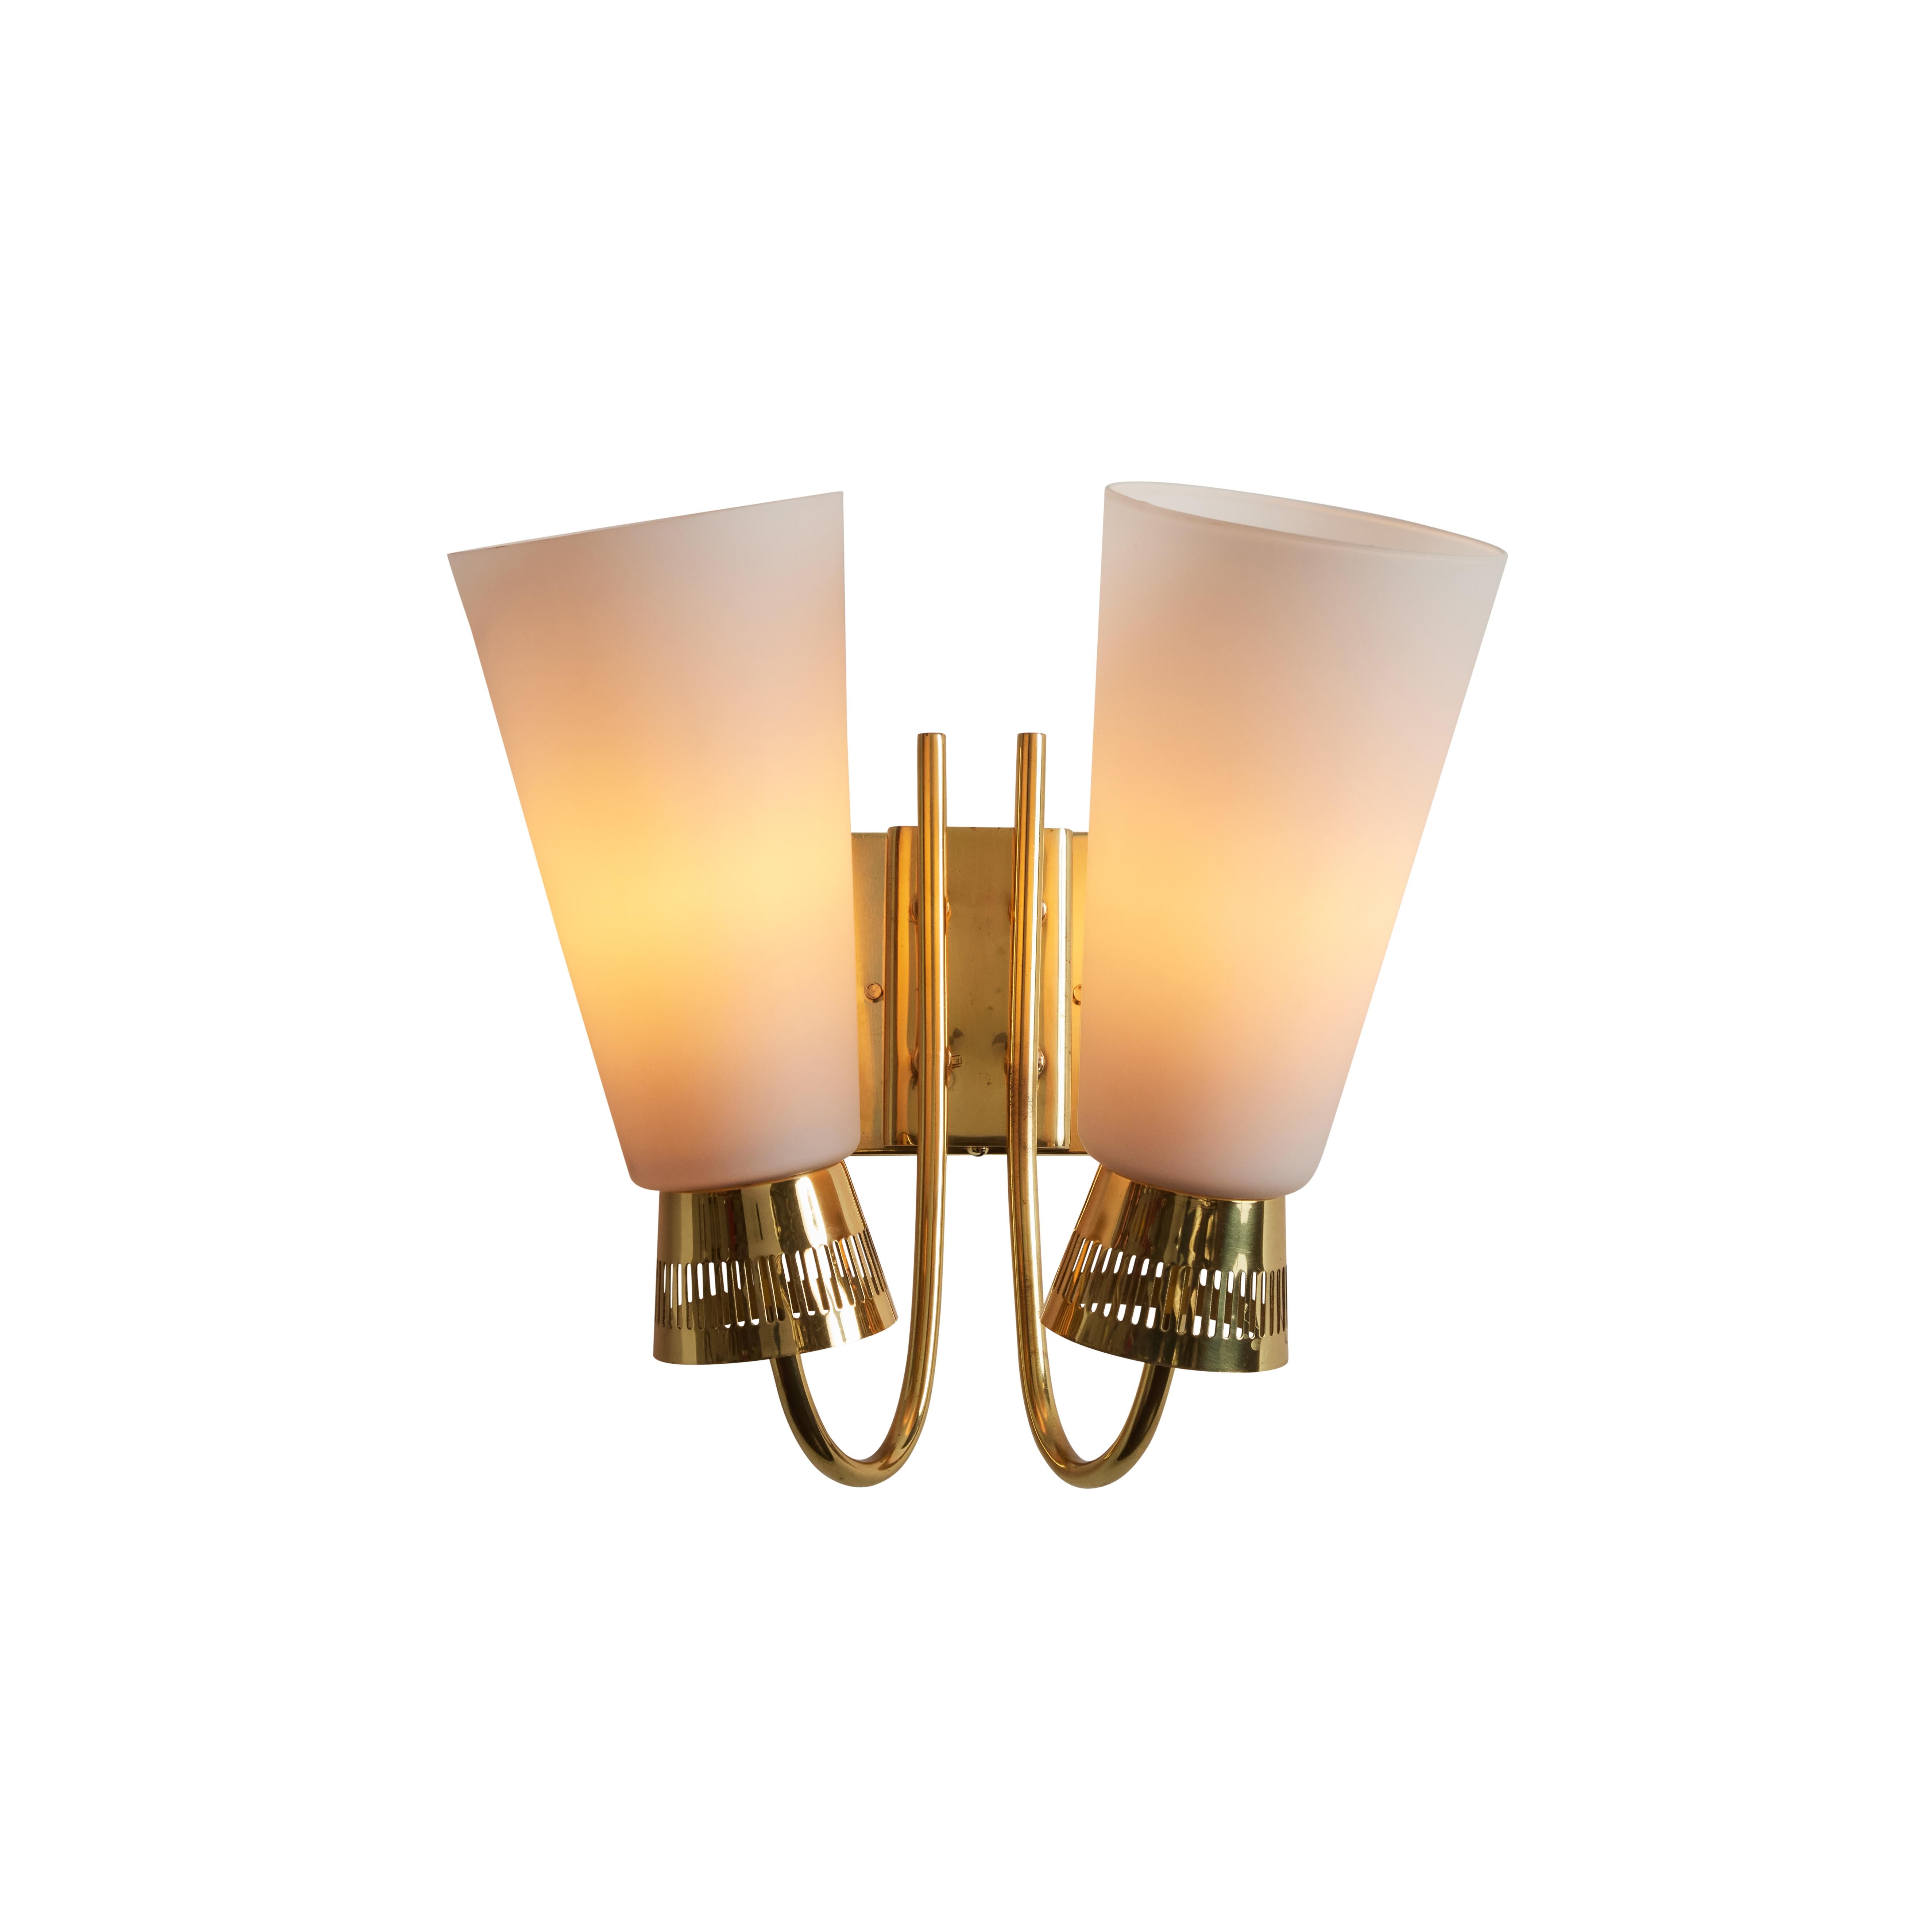 Pair of 1950s Mauri Almari Model #EY60 Brass & Glass Double Sconces for Itsu For Sale 9